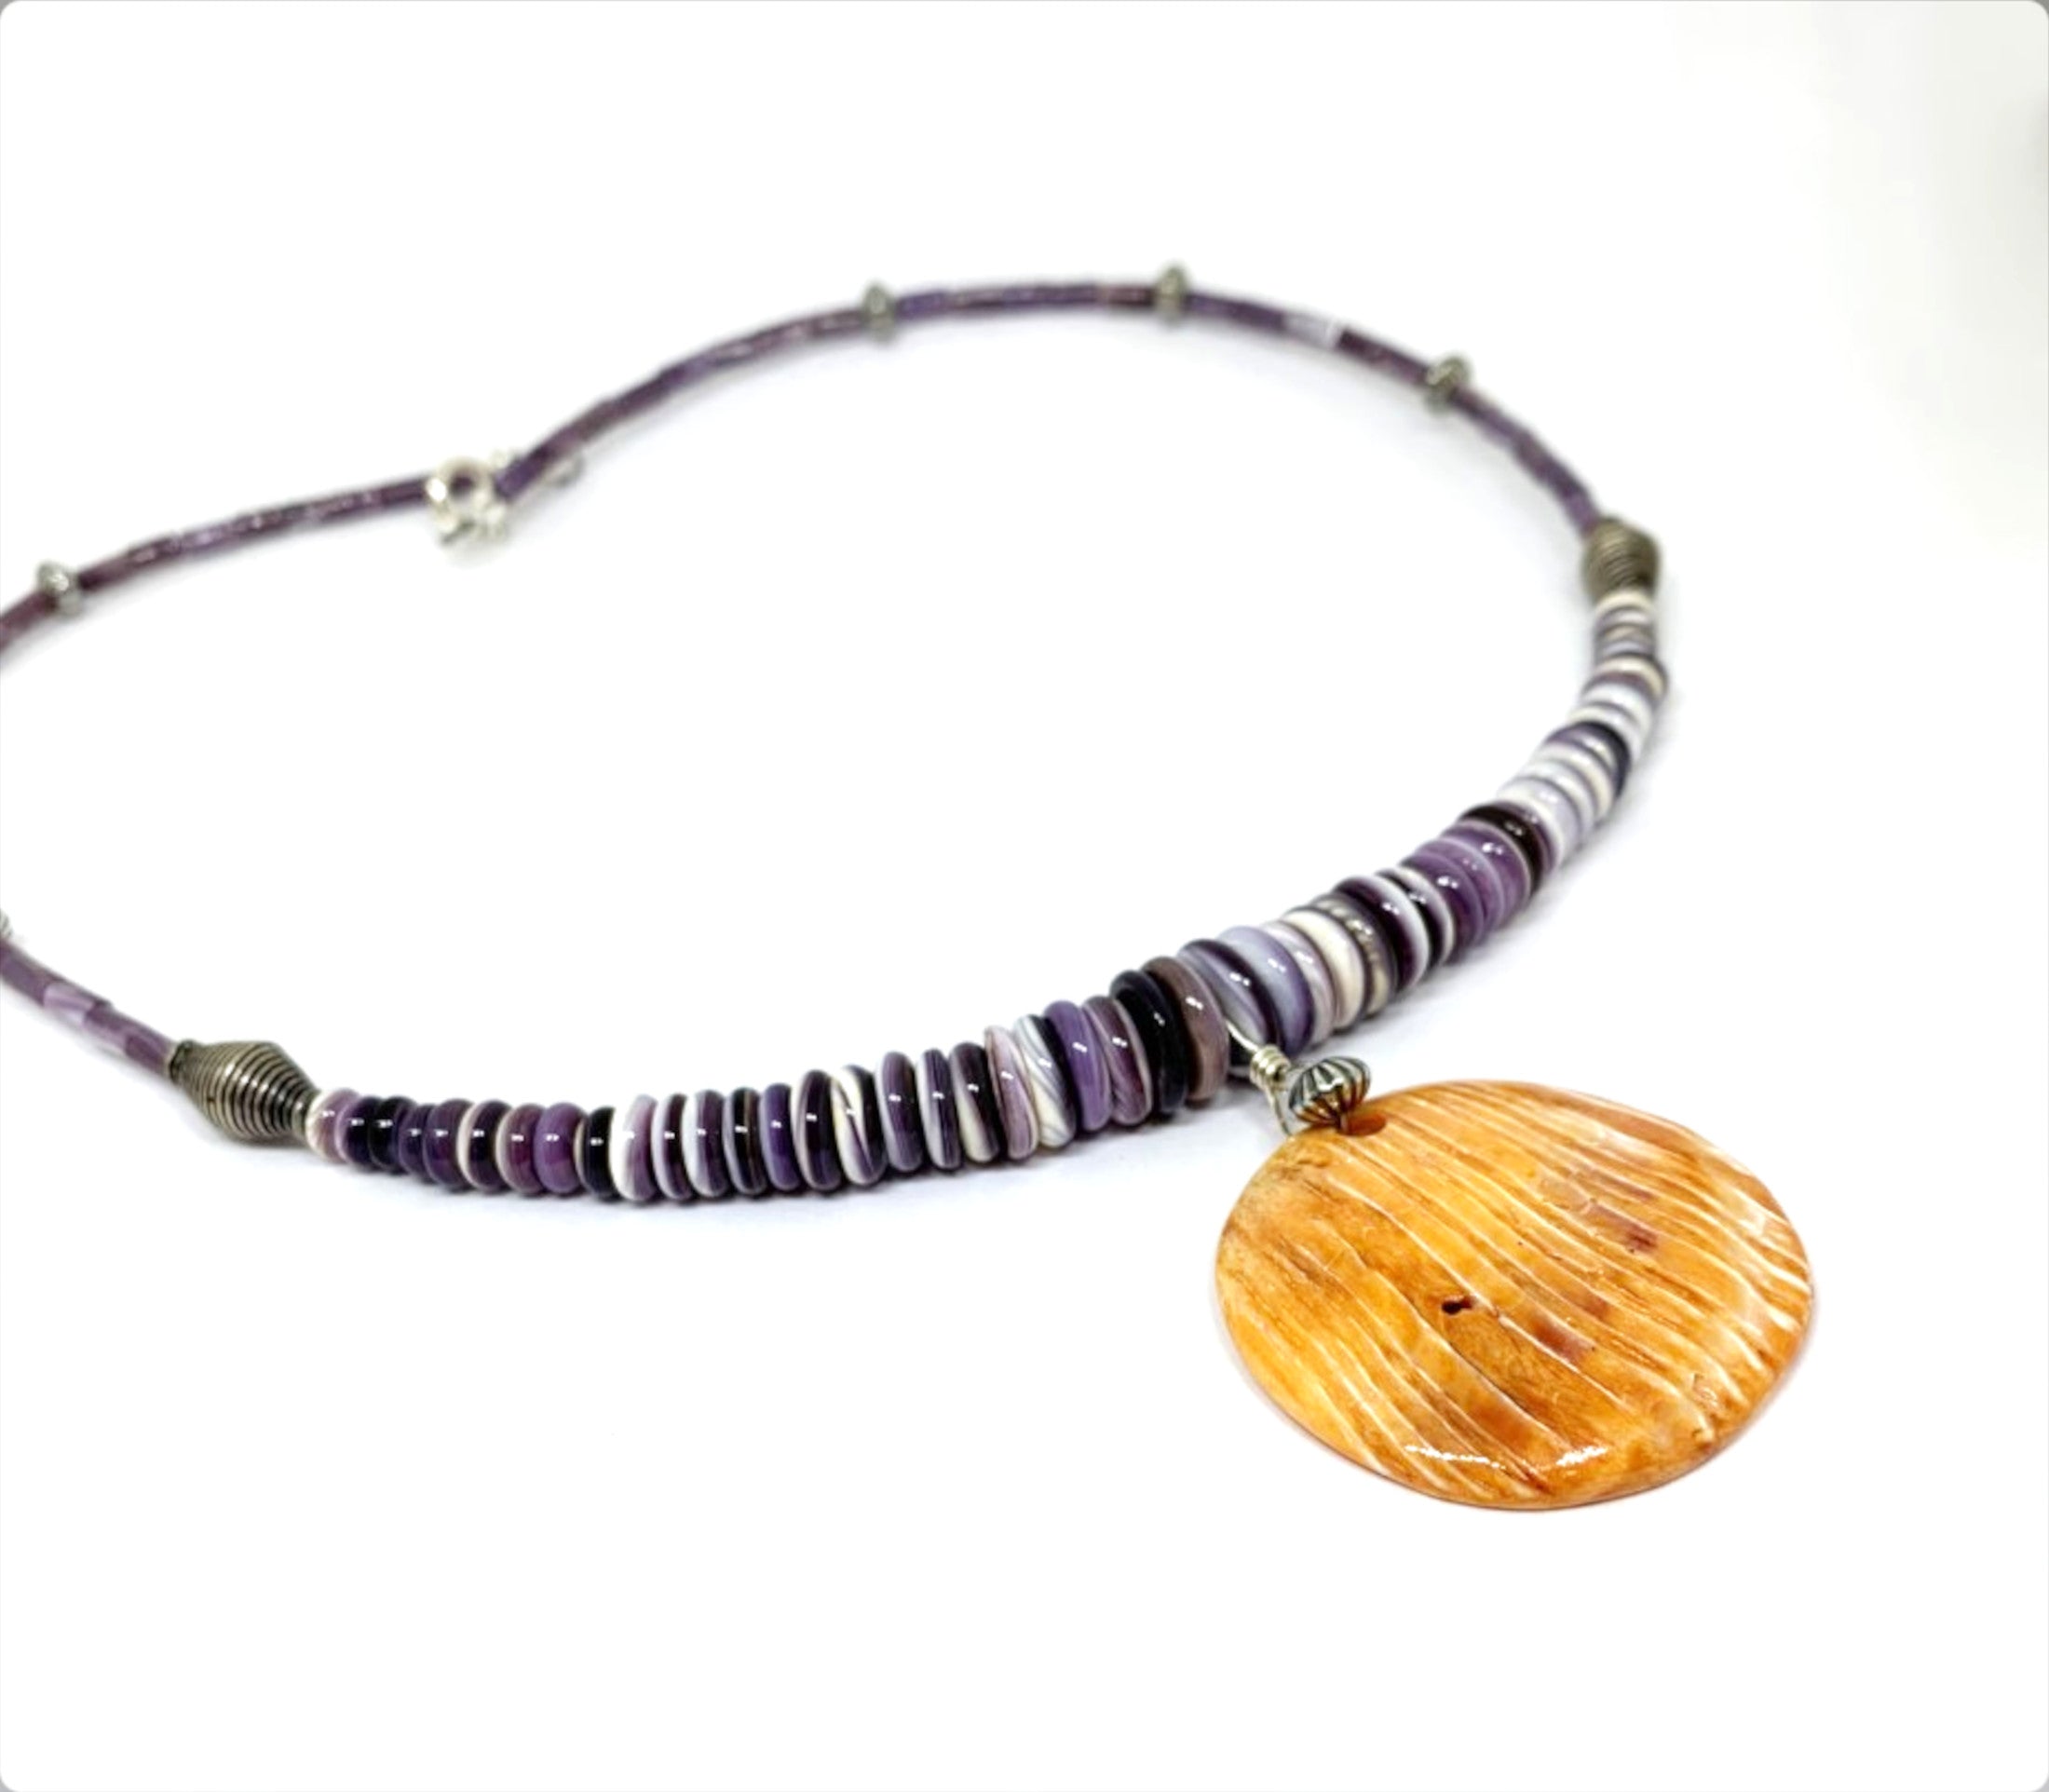 Wampum Beaded Necklace with Spiny Oyster Pendant